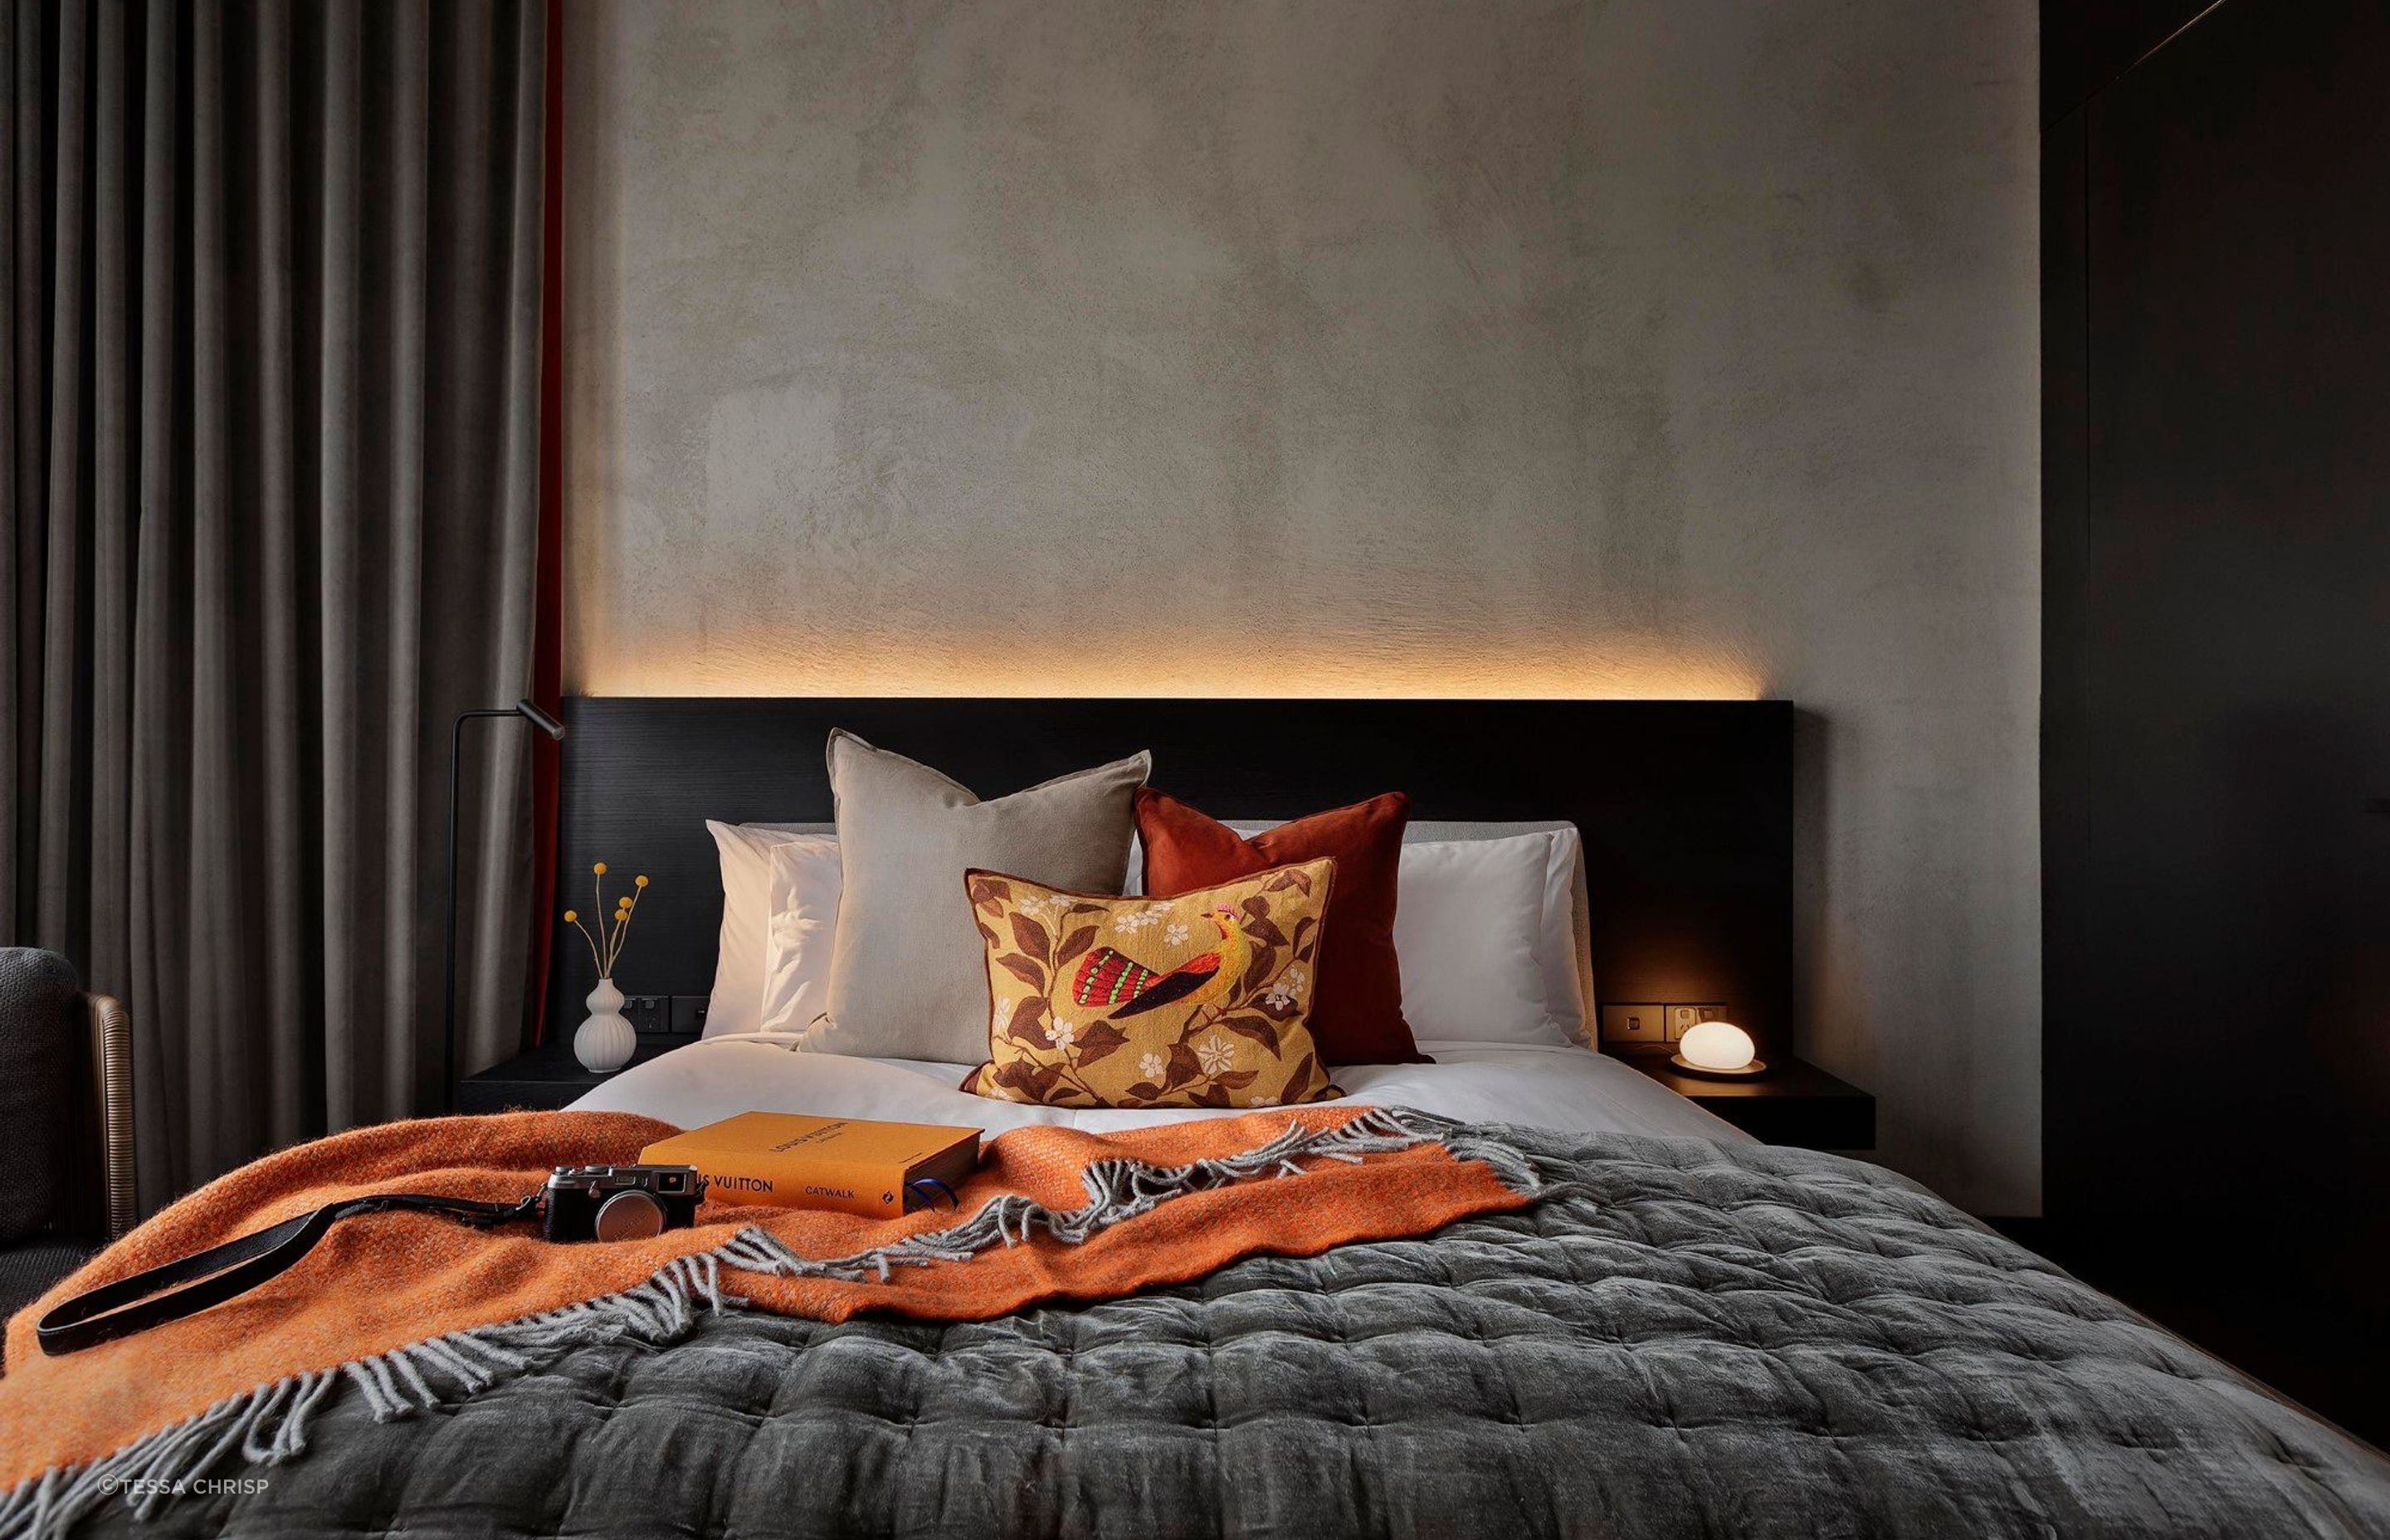 Subtle lighting effects lift the bedroom spaces, and highlight the textured walls.